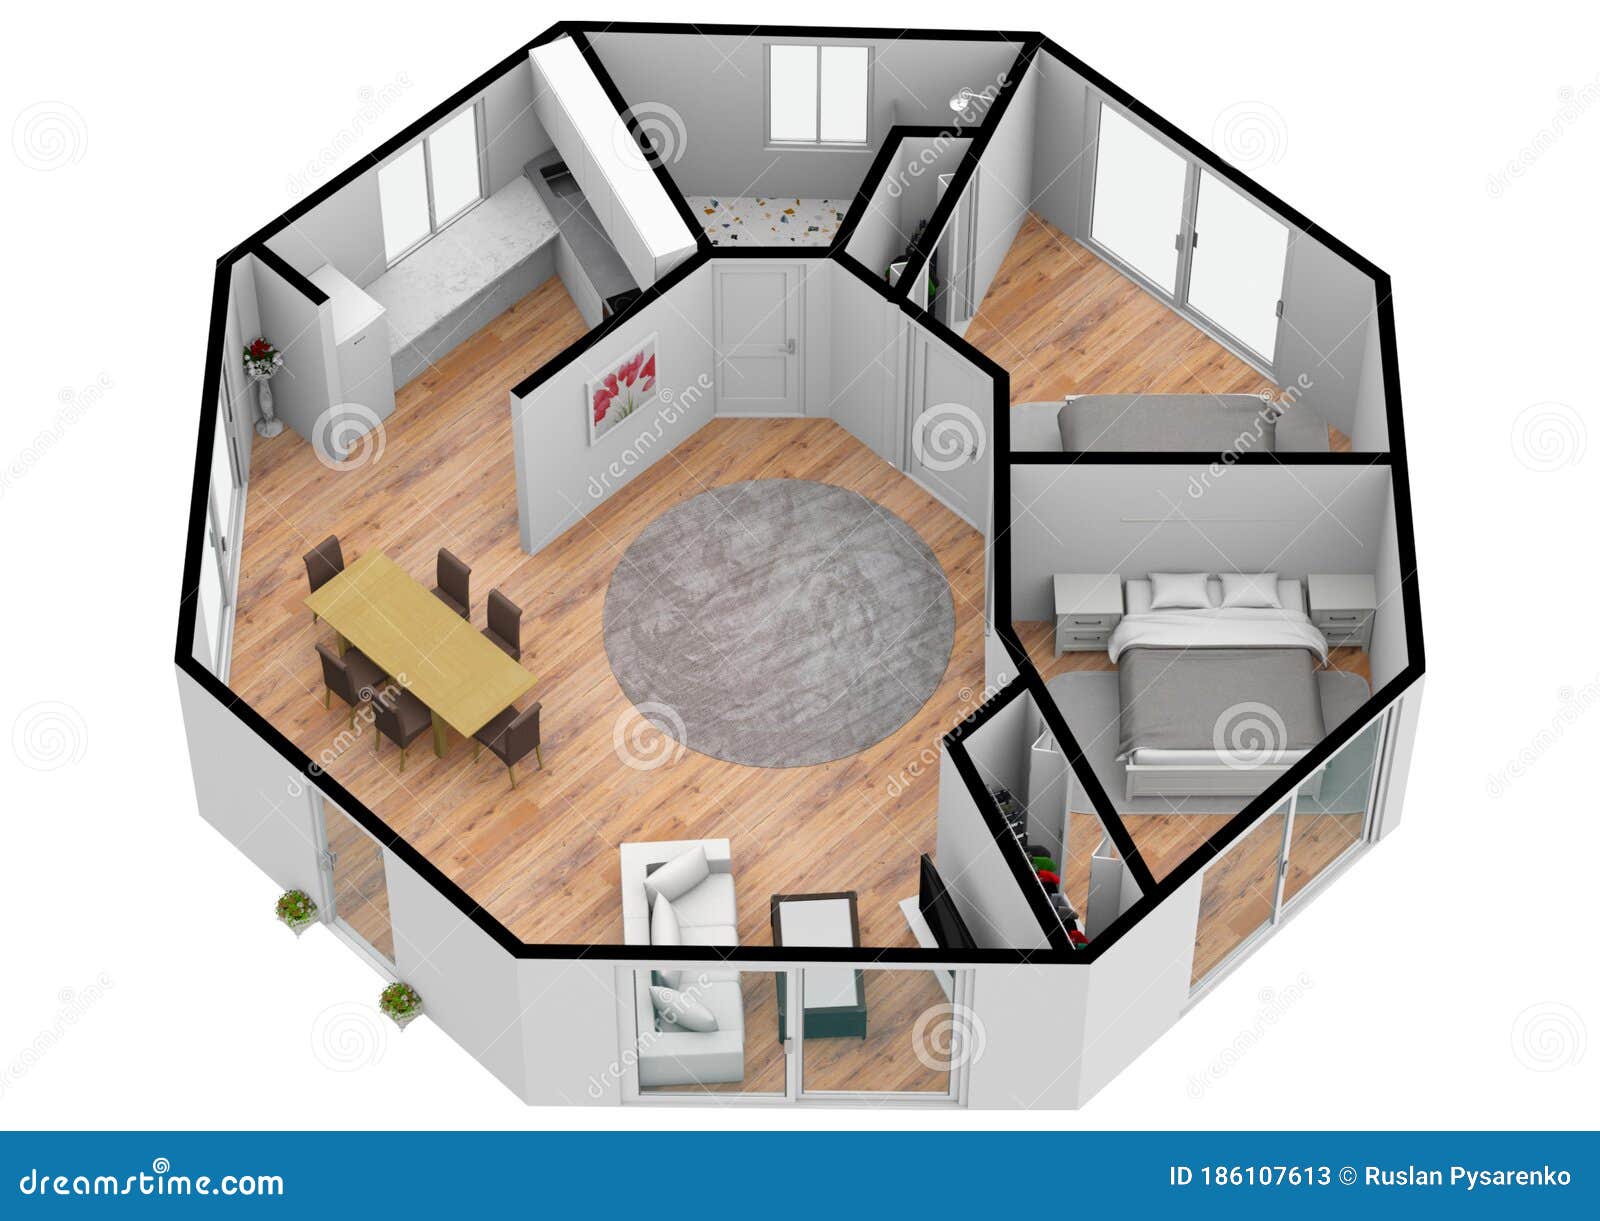 How to Convert a 2D Floor Plan Image to 3D Floor Plan (that You Can Edit)